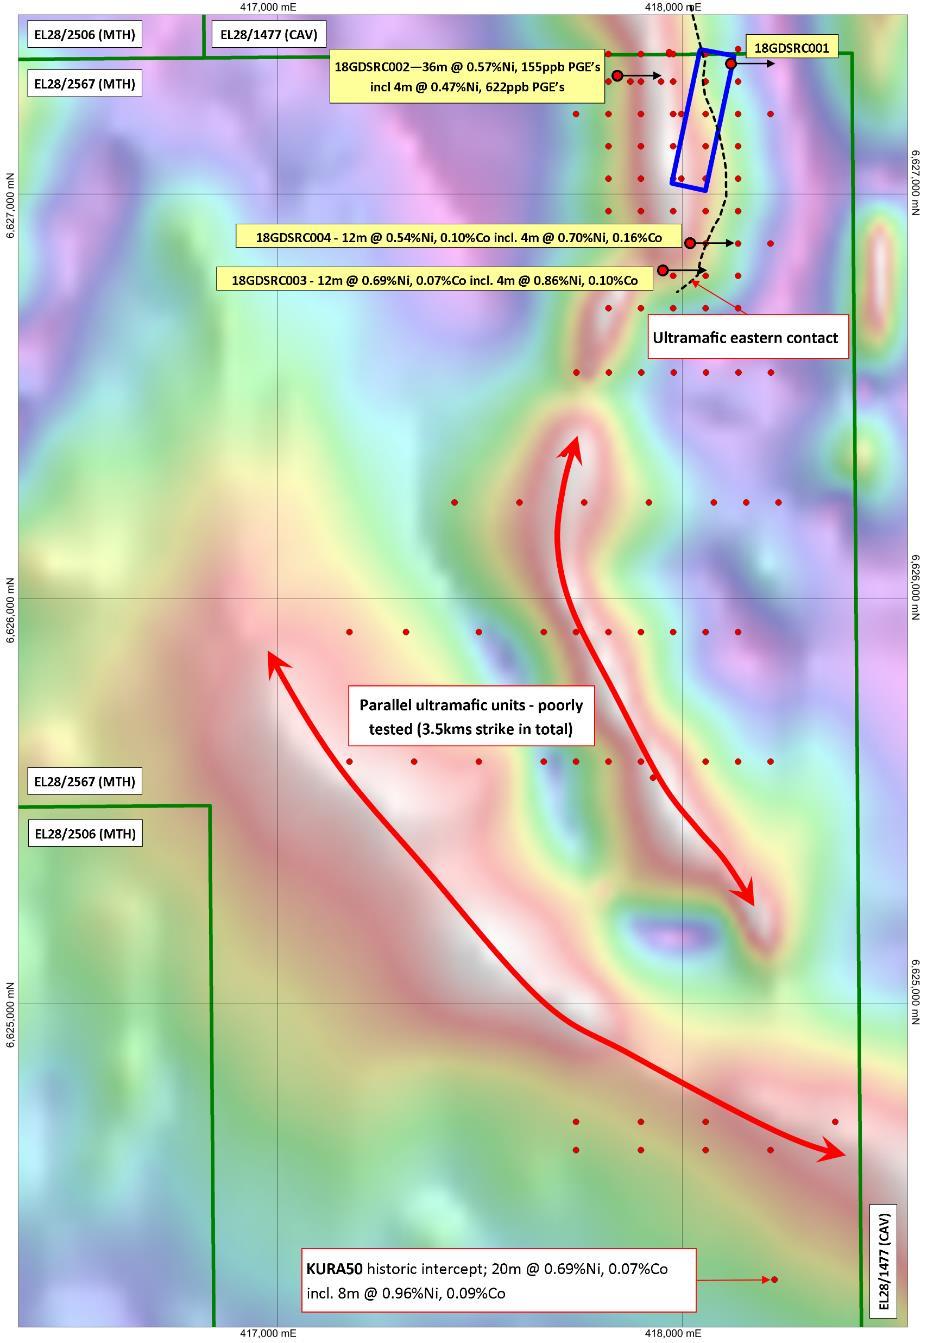 New off hole EM conductor at Target 1A Nickel sulphides and gossan confirmed New off hole conductor (CT of 3400S), lies along the eastern edge of